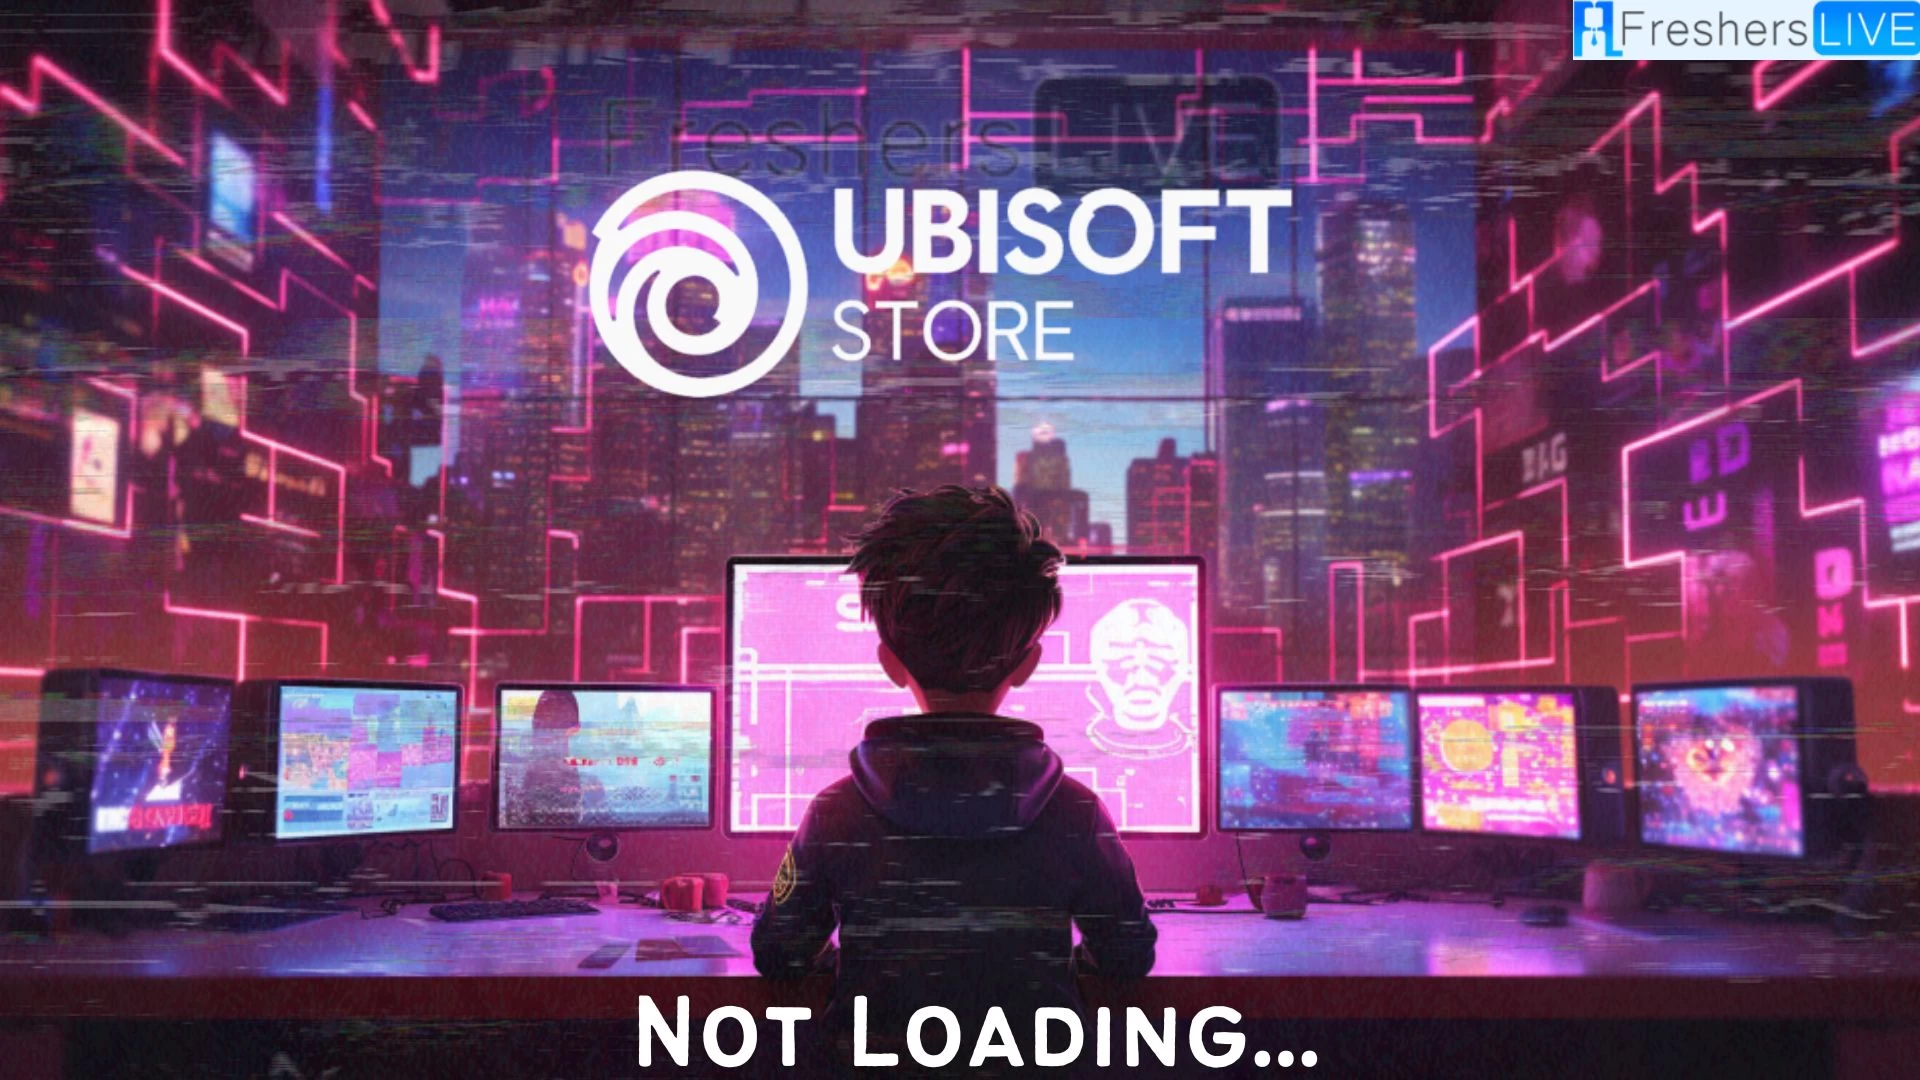 Ubisoft Store Not Loading, How to Fix Ubisoft Store Not Loading?